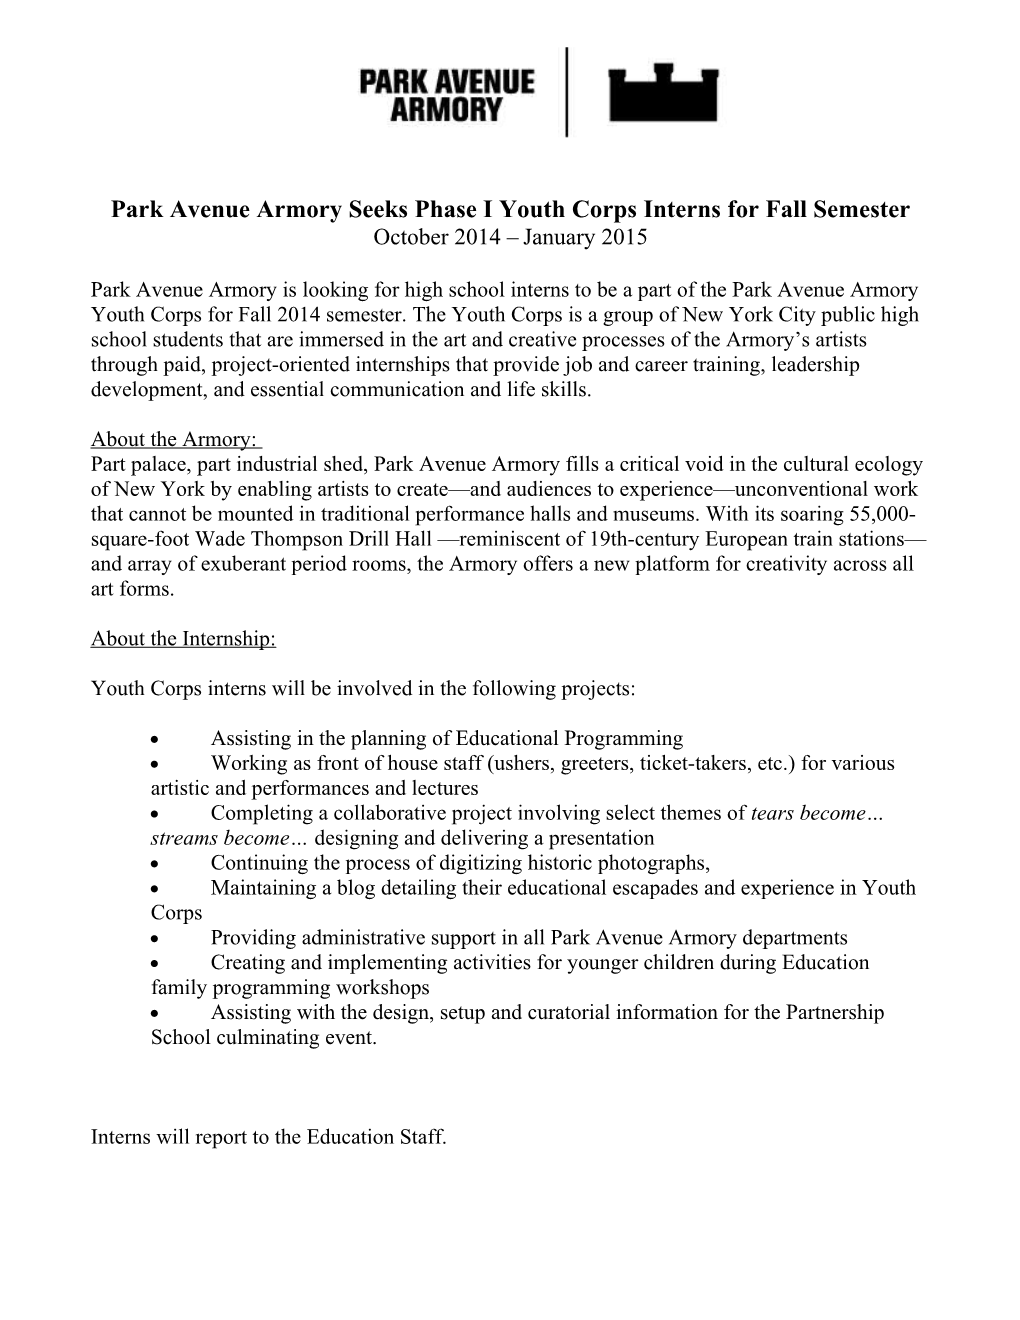 Park Avenue Armory Seeks Phase I Youth Corps Interns for Fall Semester